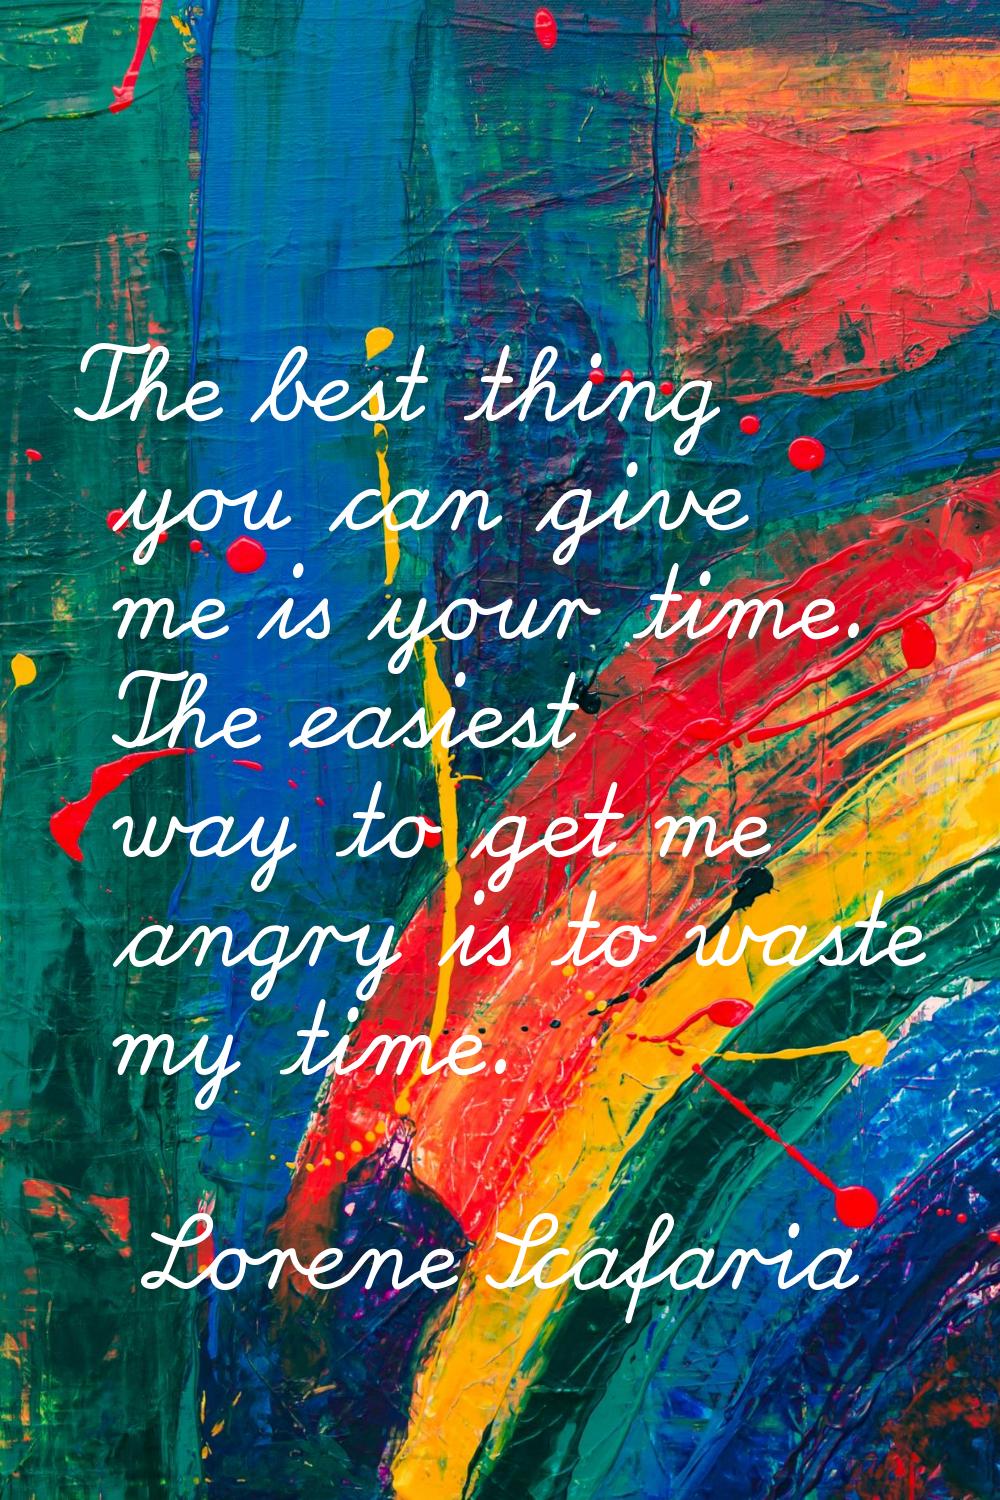 The best thing you can give me is your time. The easiest way to get me angry is to waste my time.